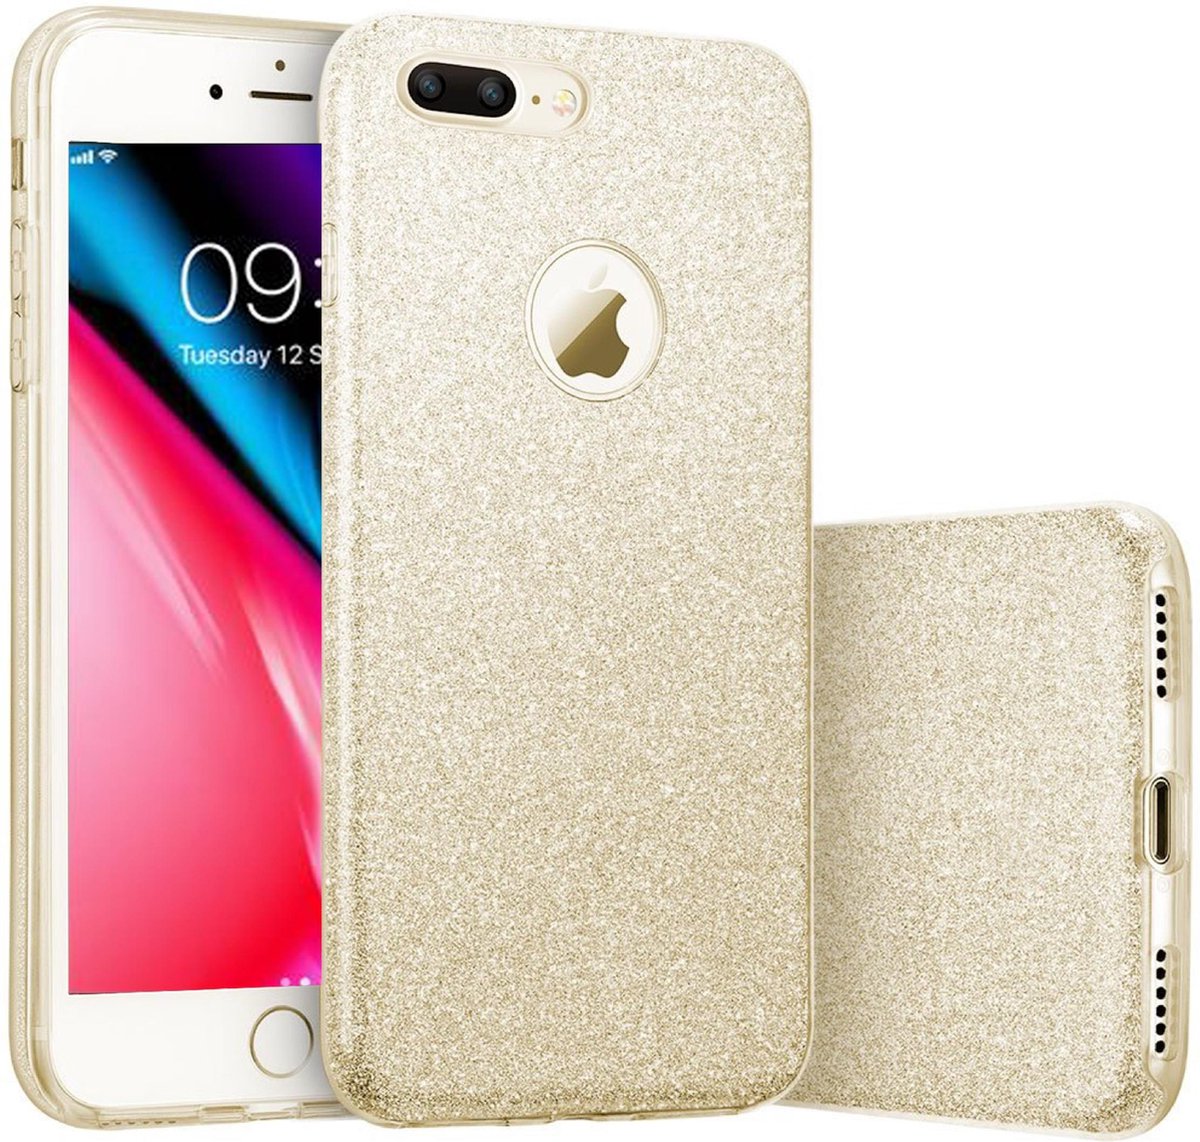 spreiding Iets openbaring iPhone 8 Plus / 7 Plus Hoesje - Glitter Back Cover Bling Siliconen Case Hoes  Goud | bol.com